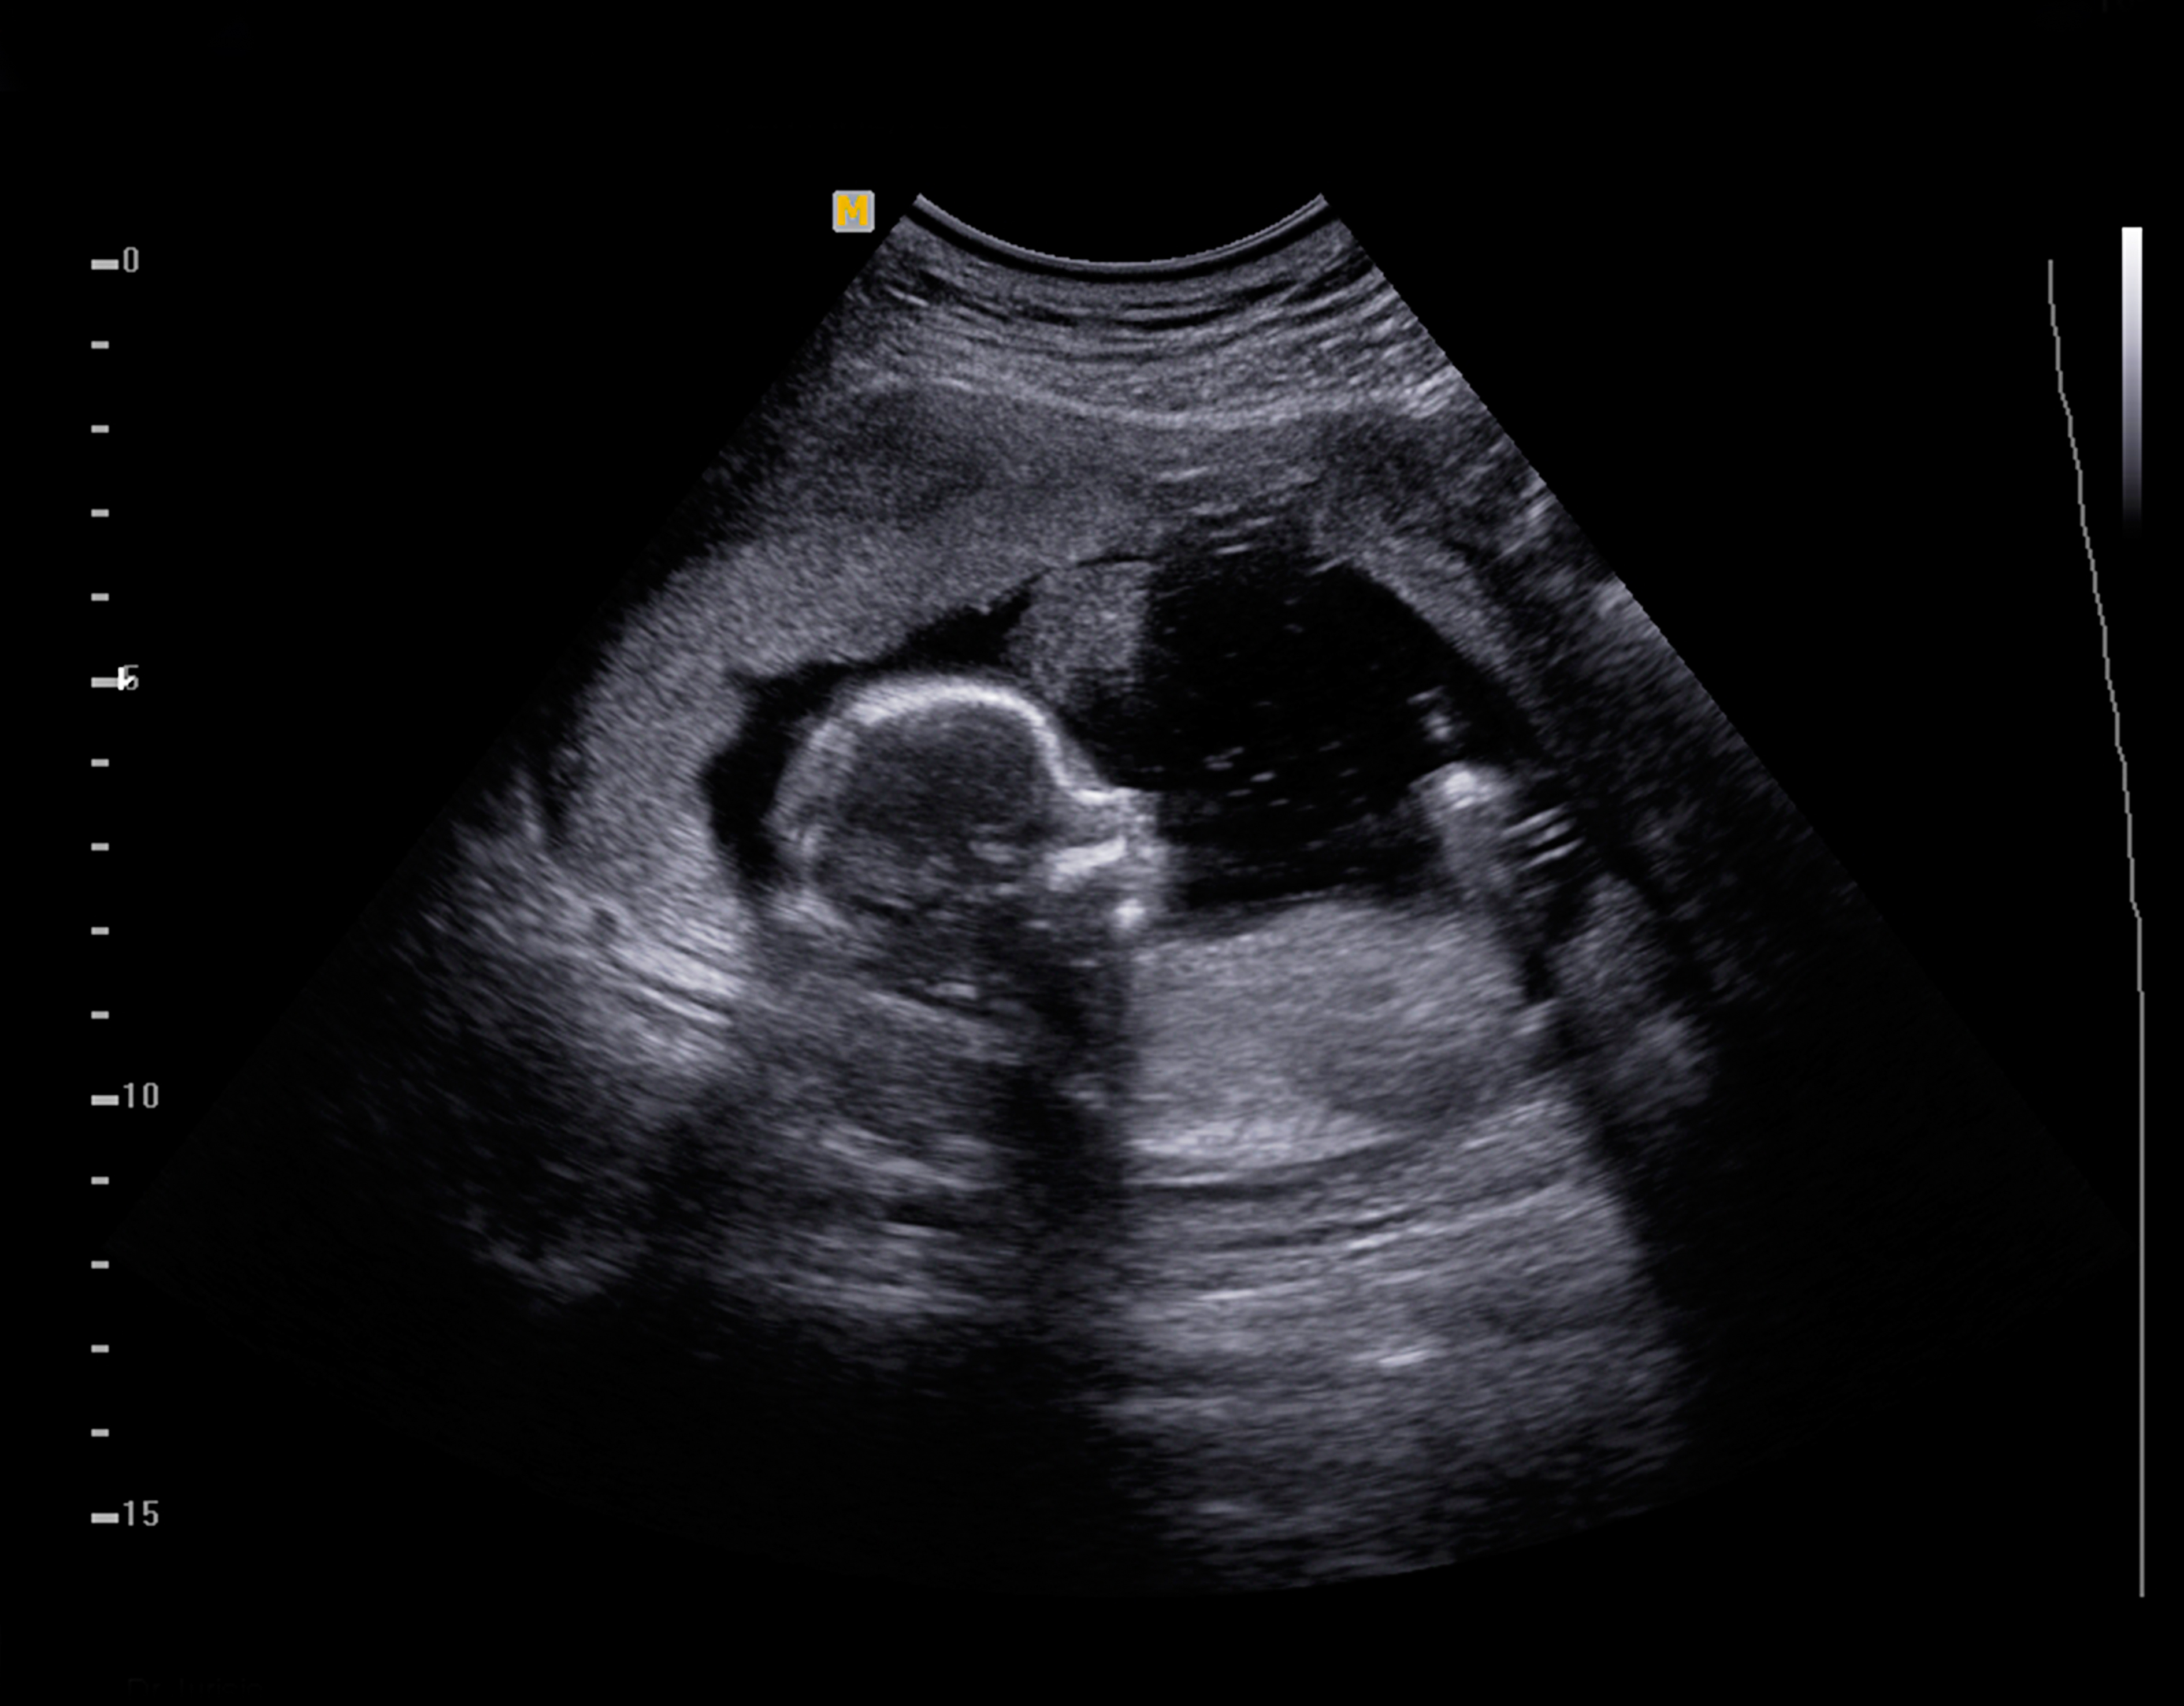 Baby Ultrasound Pictures Twins - Get More Anythink's